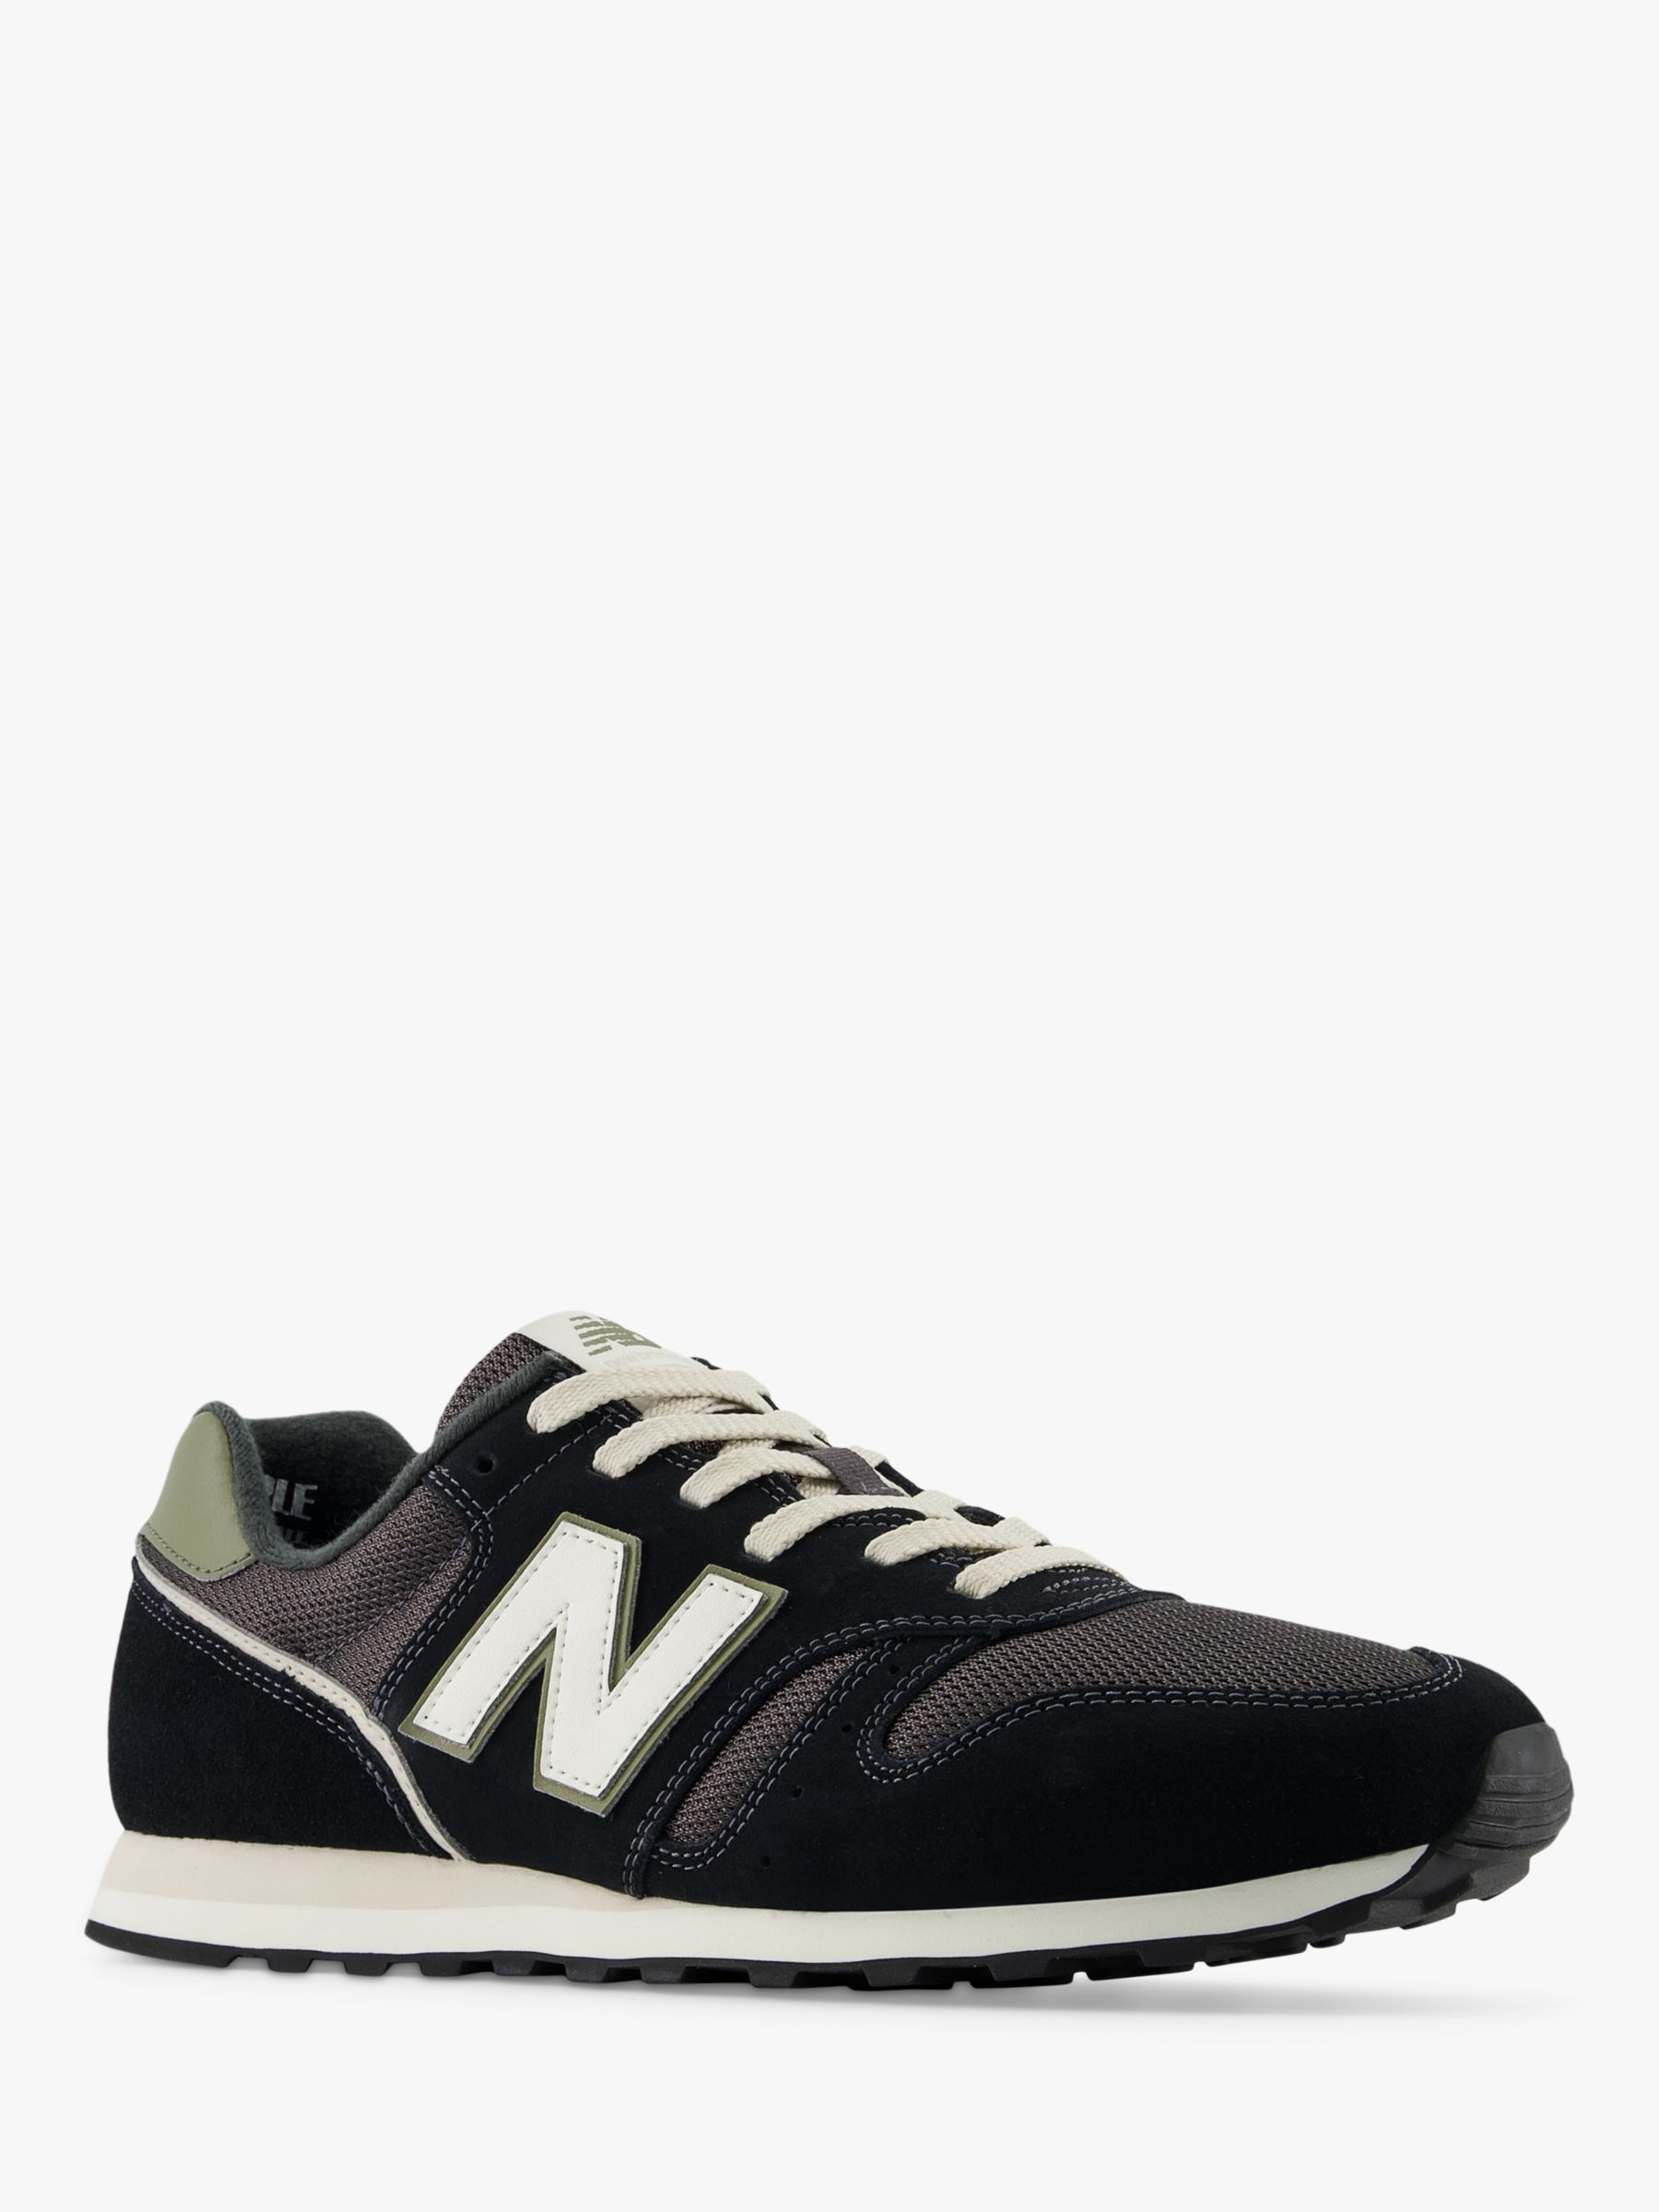 New Balance 373 V2 Trainers, Black/Silver at John Lewis & Partners